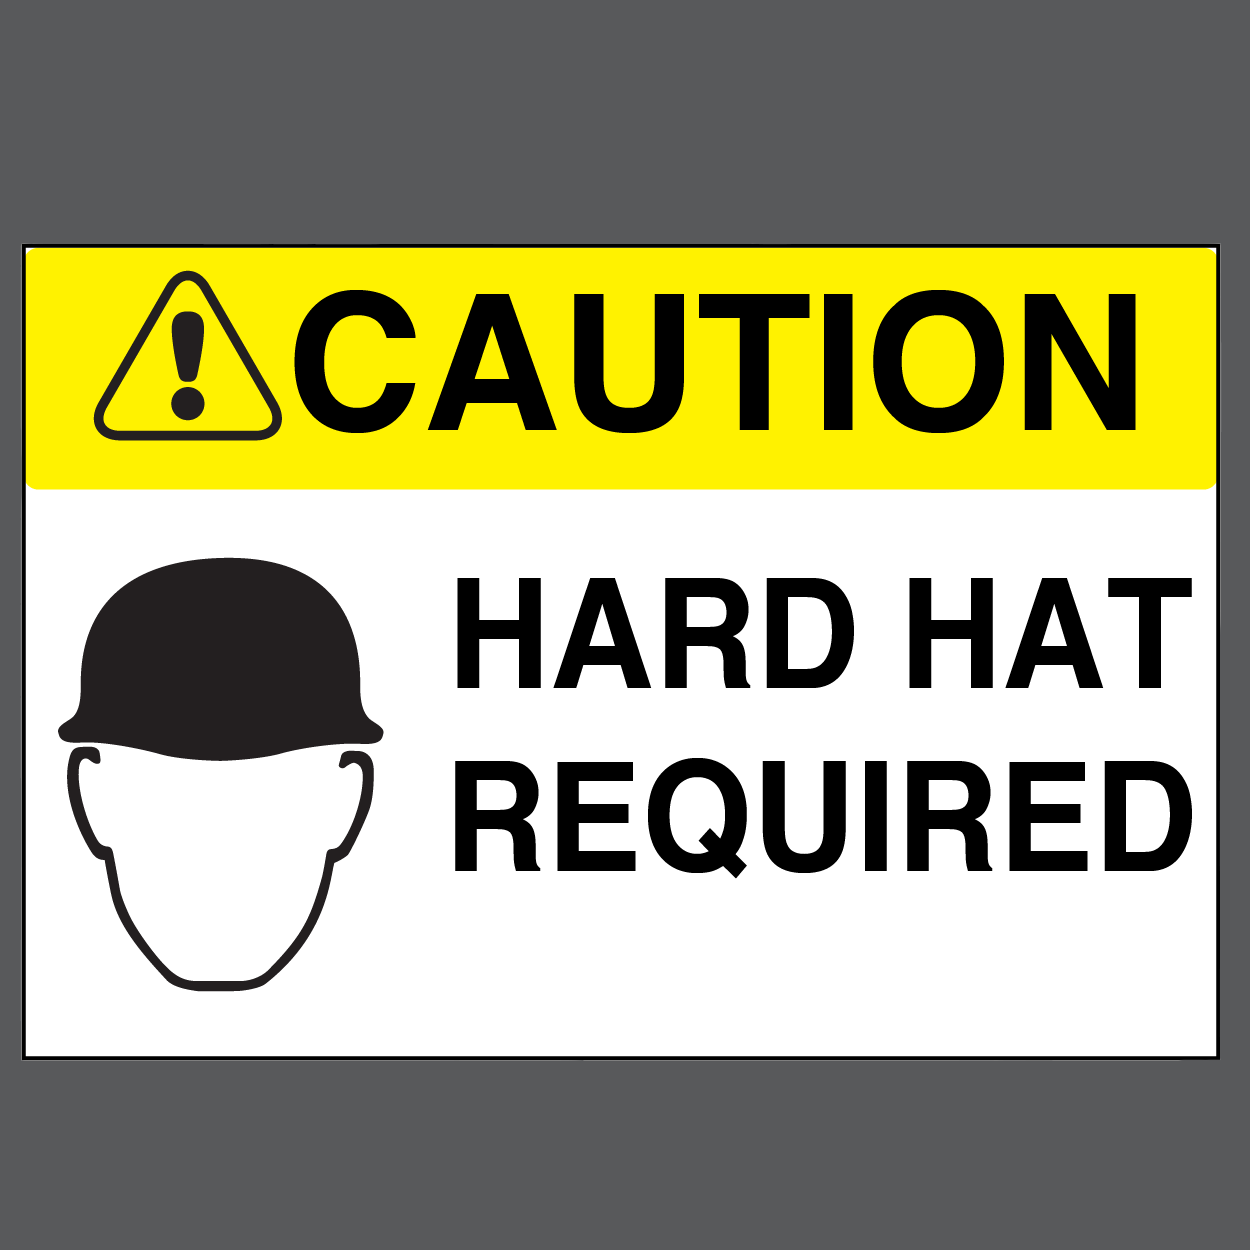 Caution "Hard Hat Required" Durable Matte Laminated Vinyl Floor Sign- Various Sizes Available